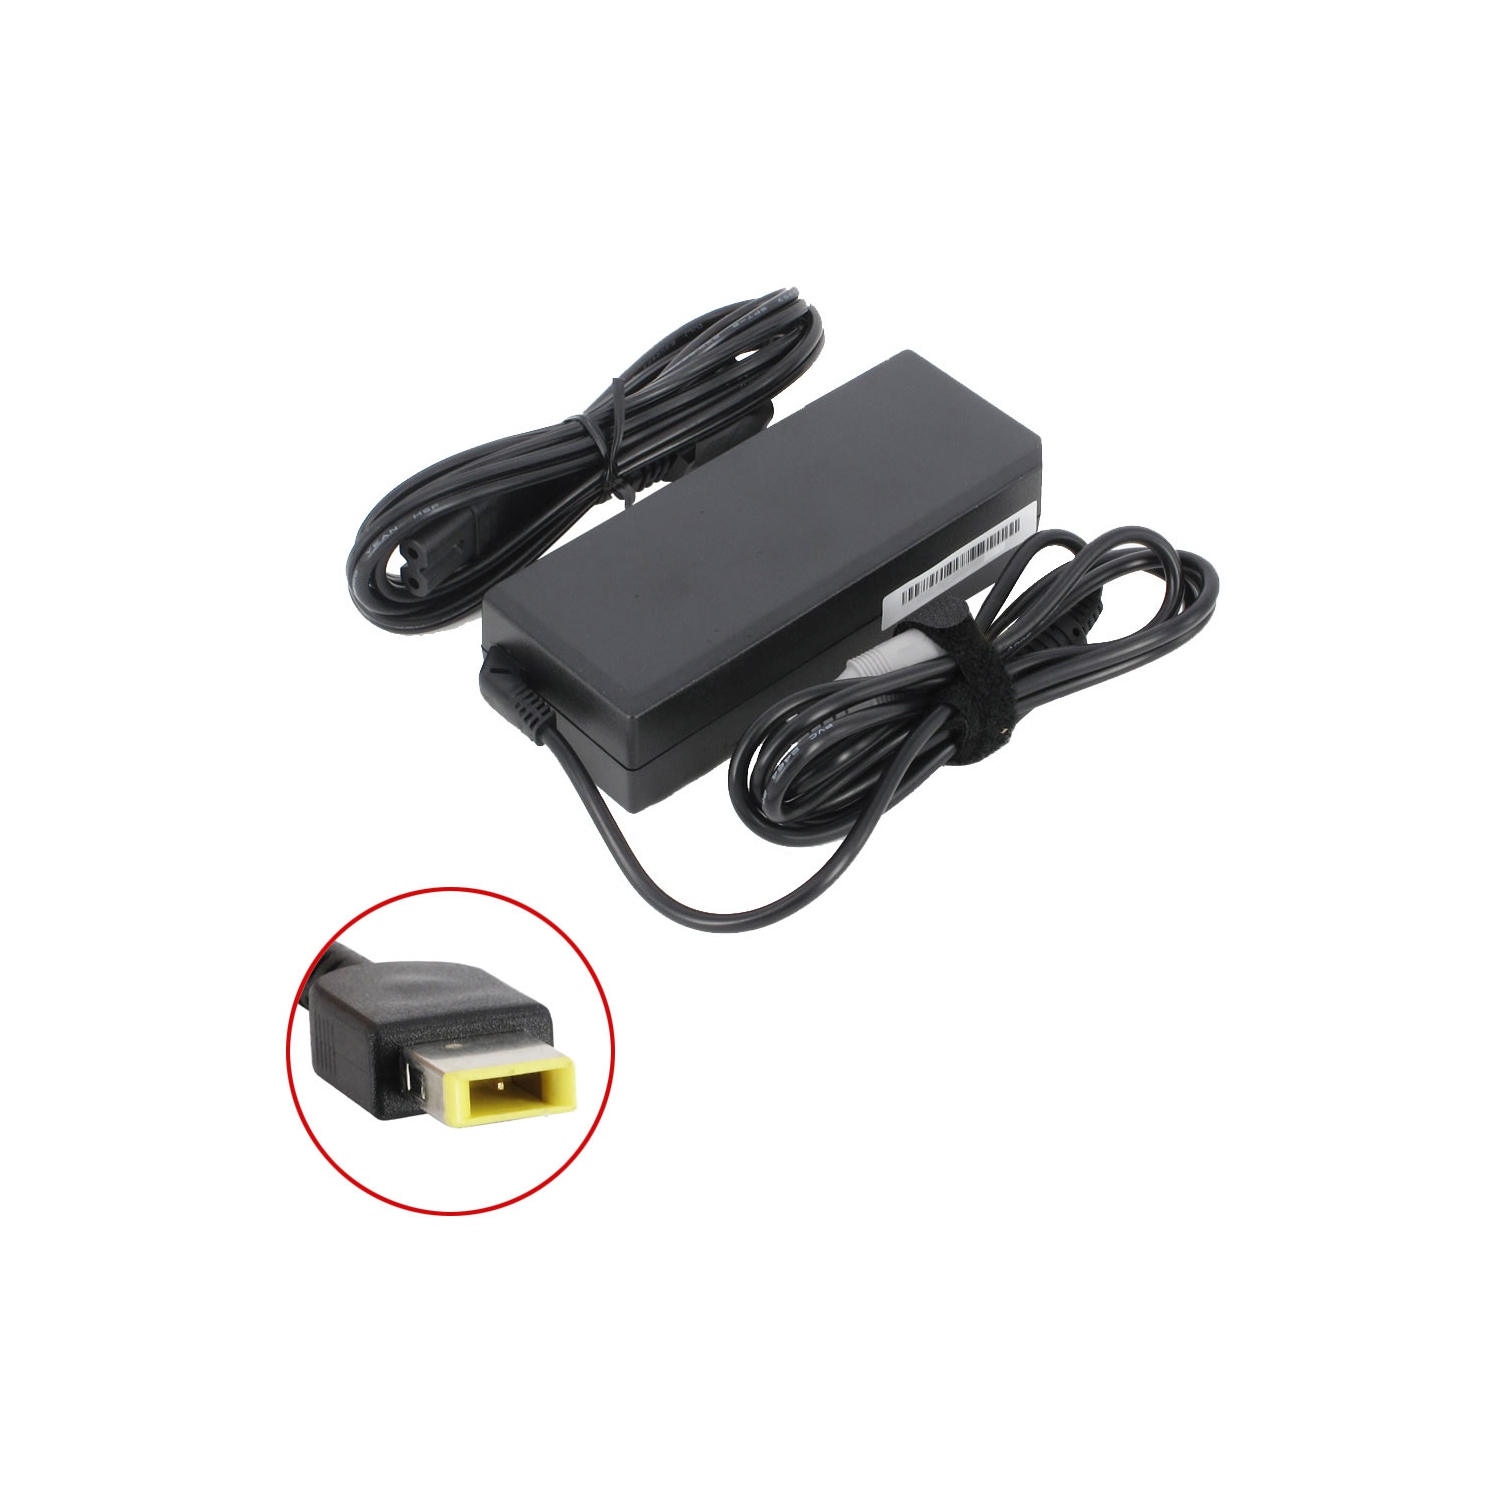 Brand New Laptop AC Adapter for Lenovo G50-30 80G0008BUS, ADP-65XB A, 0B47481, 45N0293, 45N0482, PA-1650-37LF